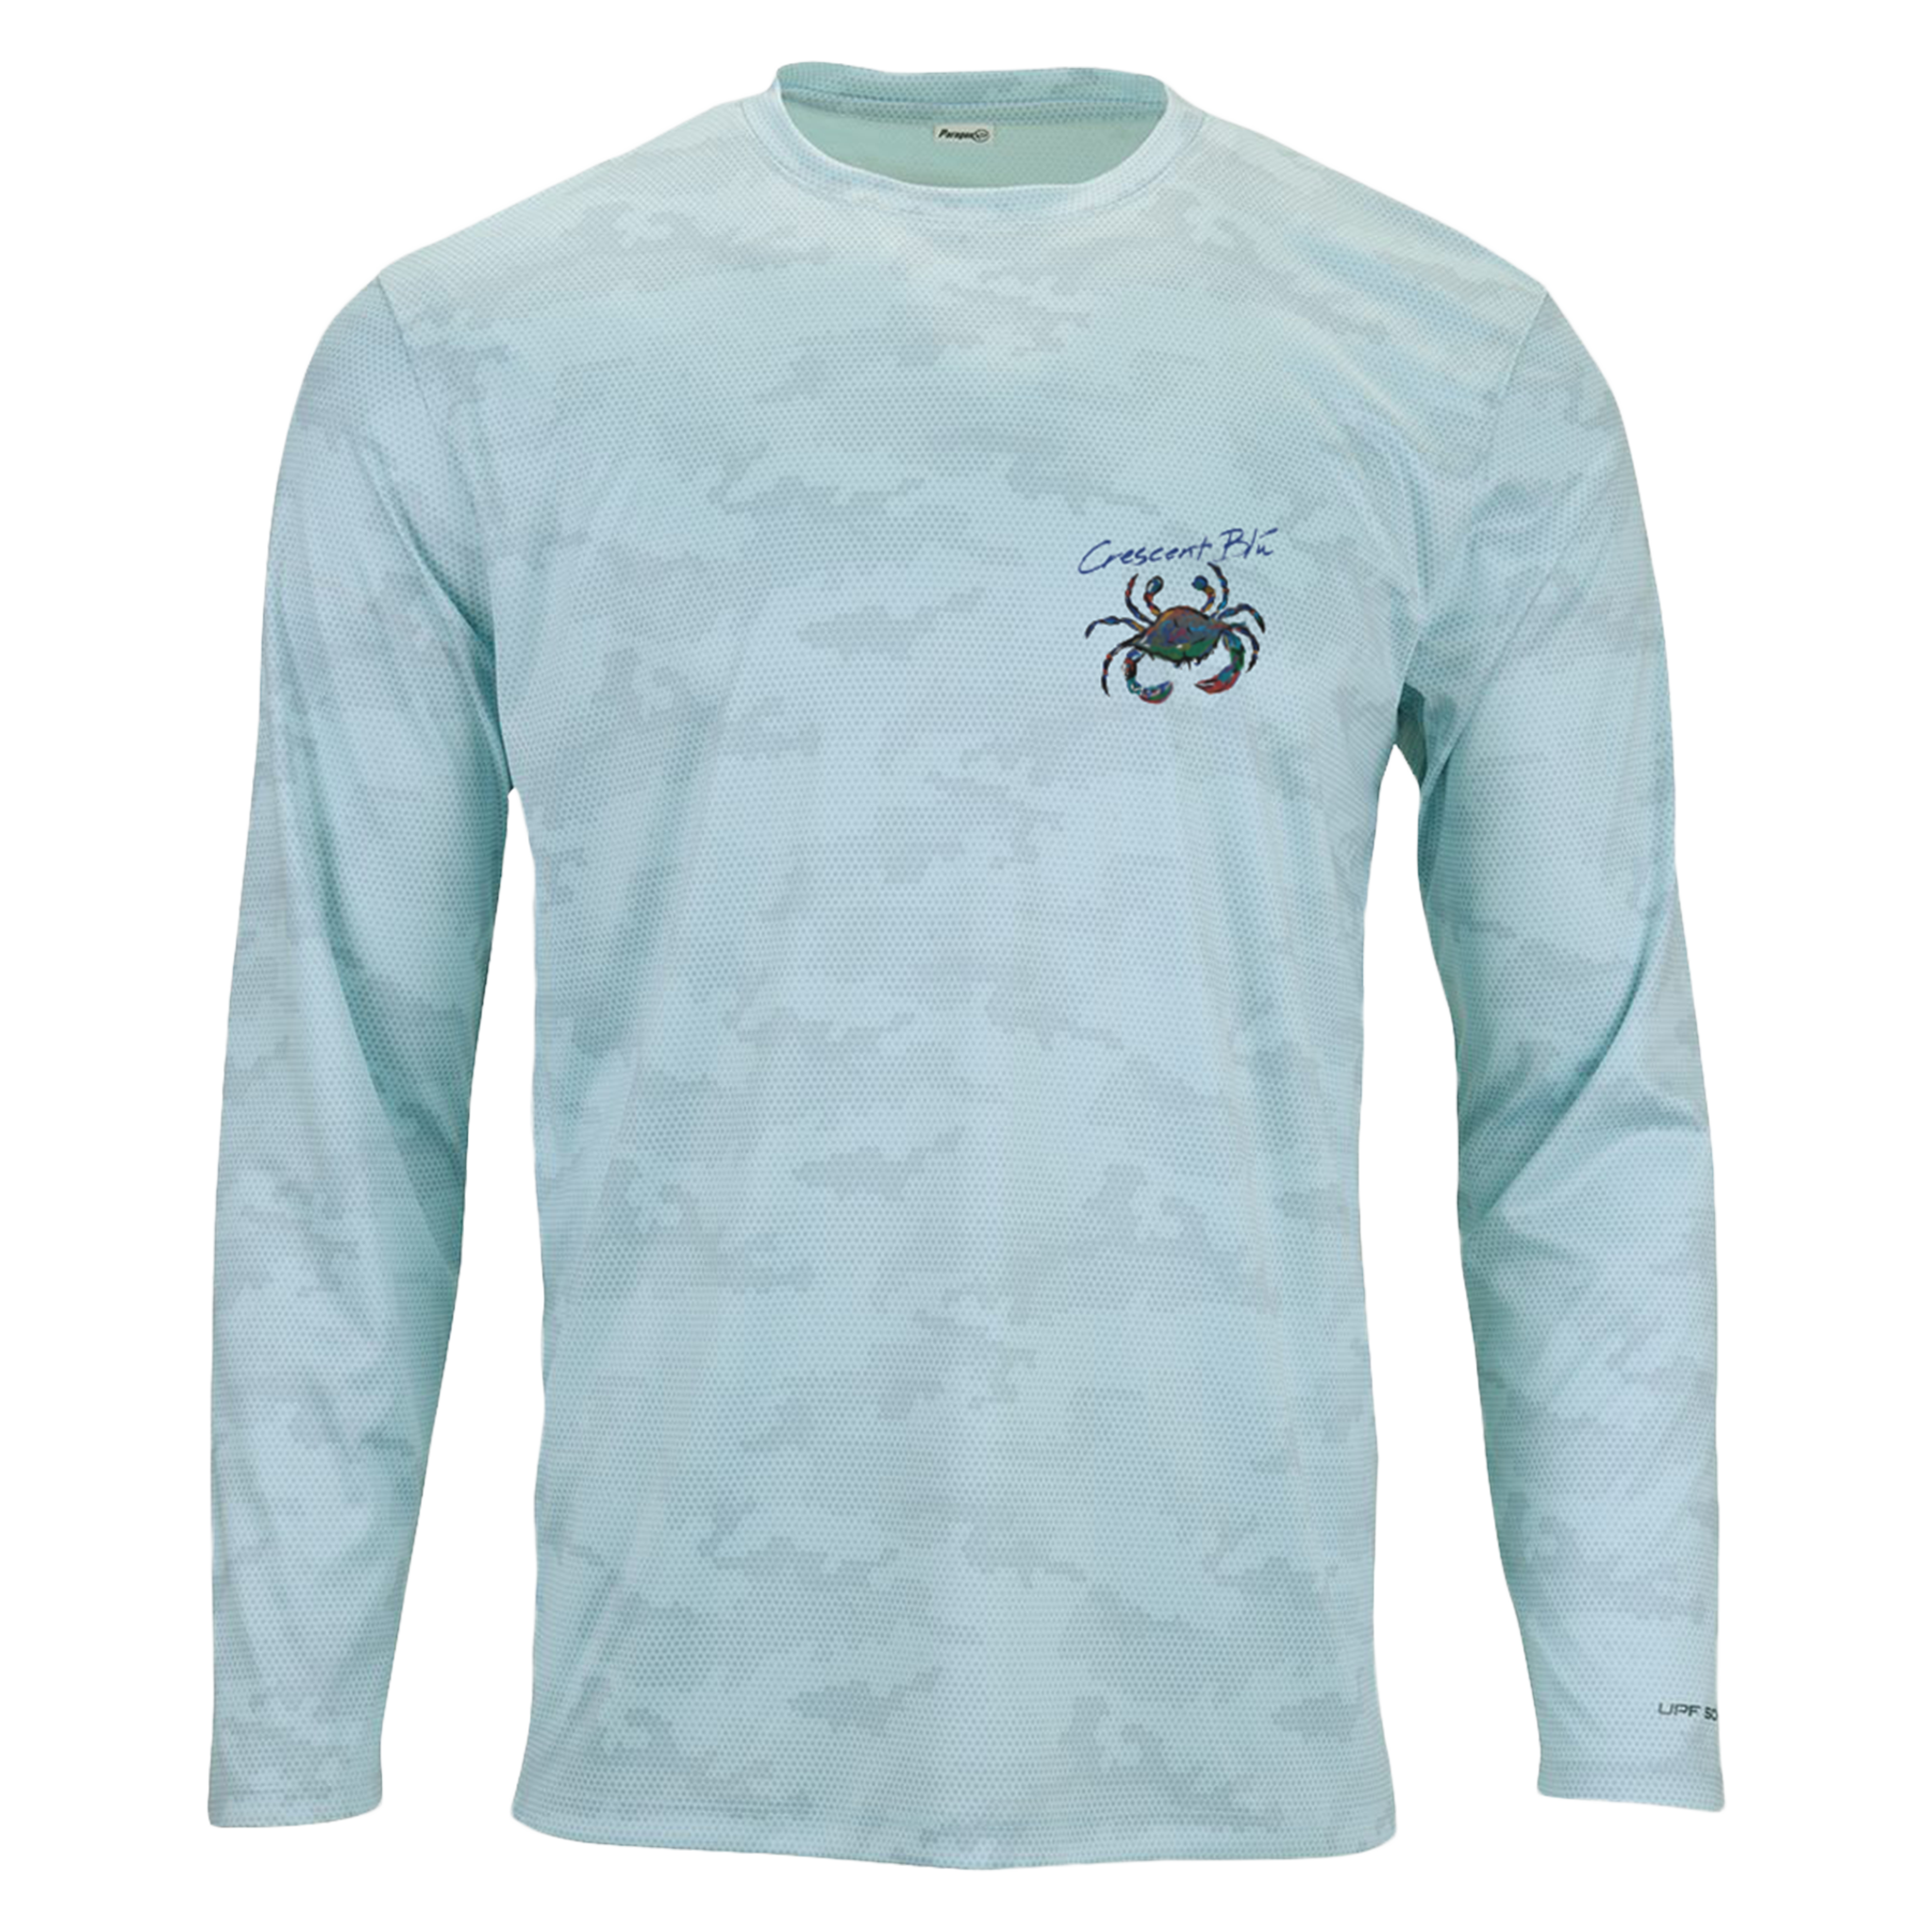 Aqua Blue Camo design long sleeve adult shirt. Multi-colored crab logo on the left upper chest. Front view. 